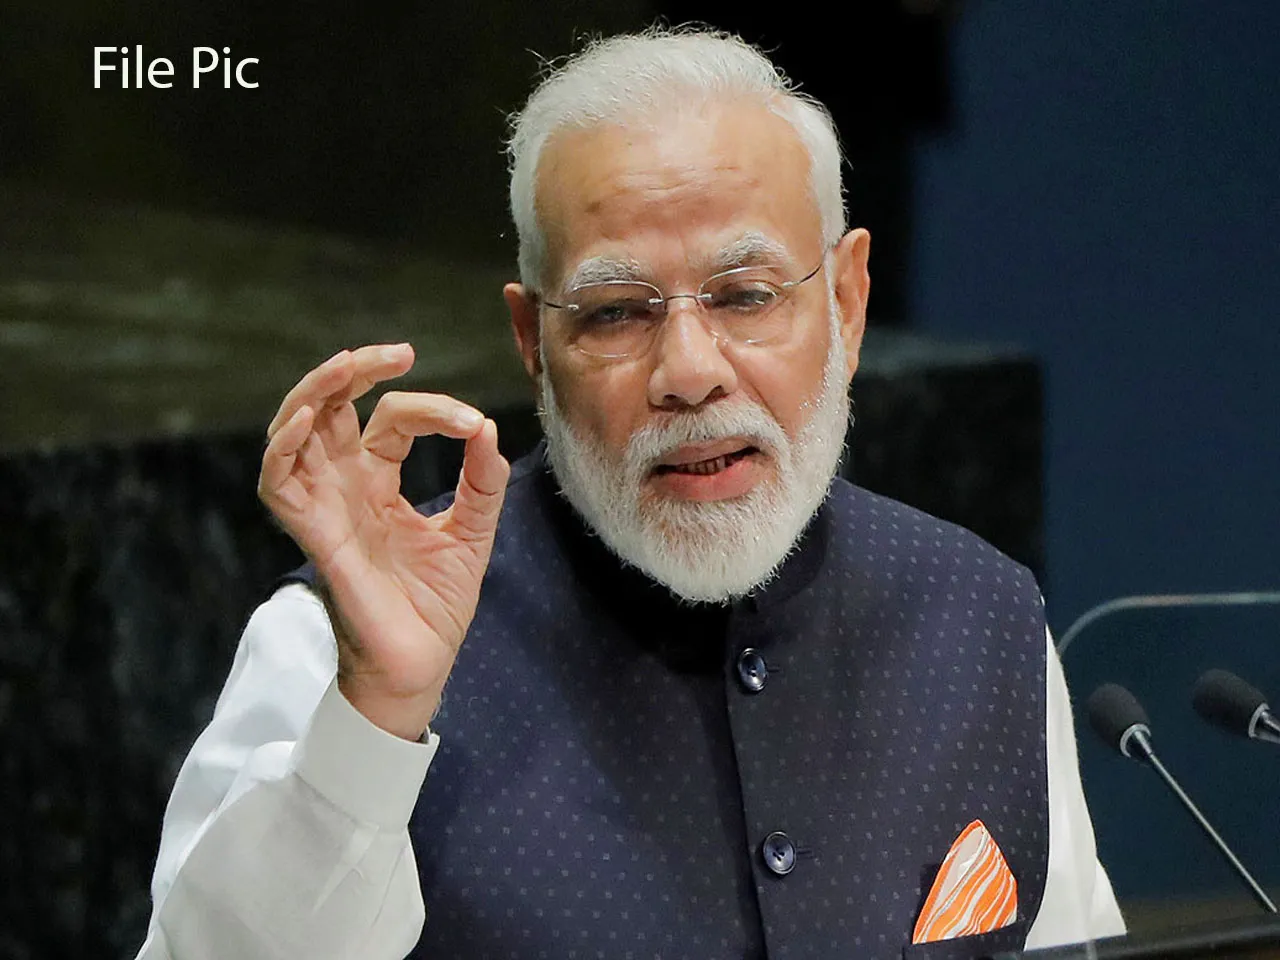 Doctors gives our society hope and strength: PM Modi